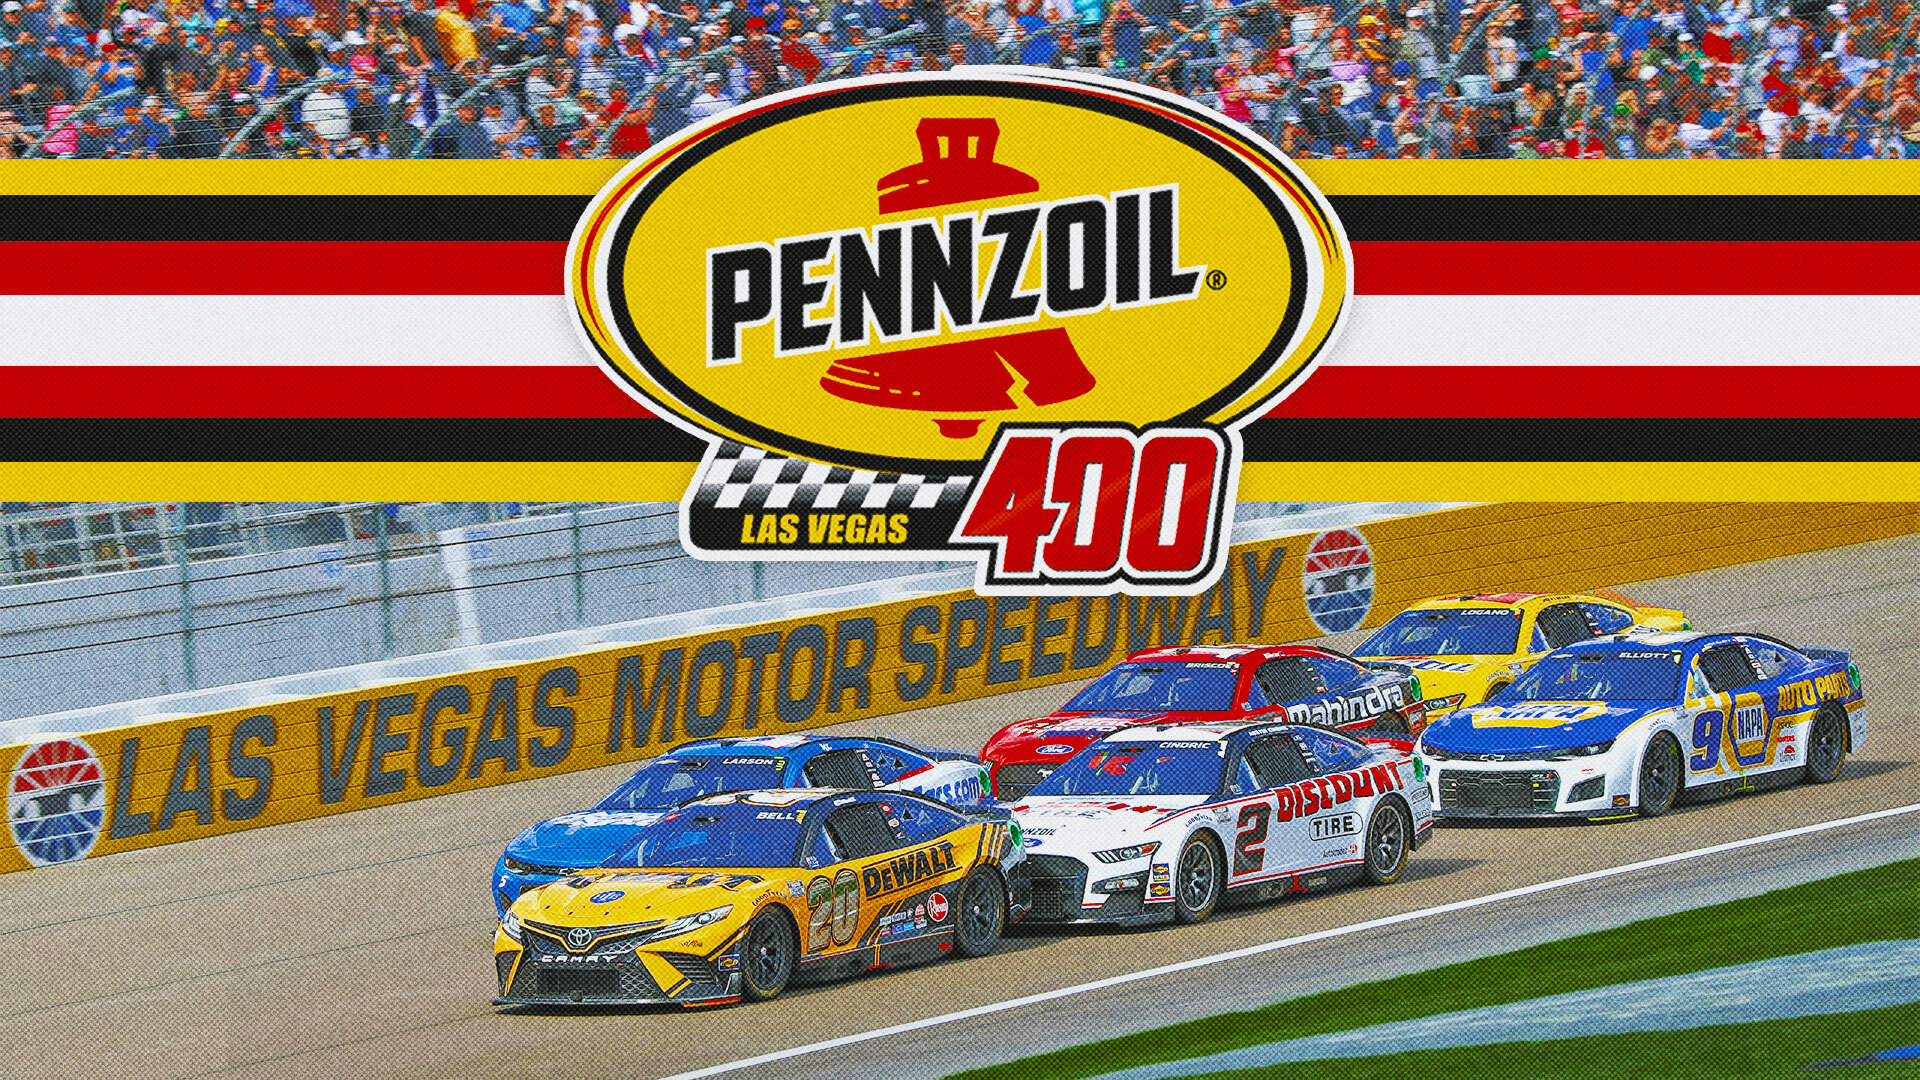 Pennzoil 400 highlights: Top moments from Las Vegas Motor Speedway